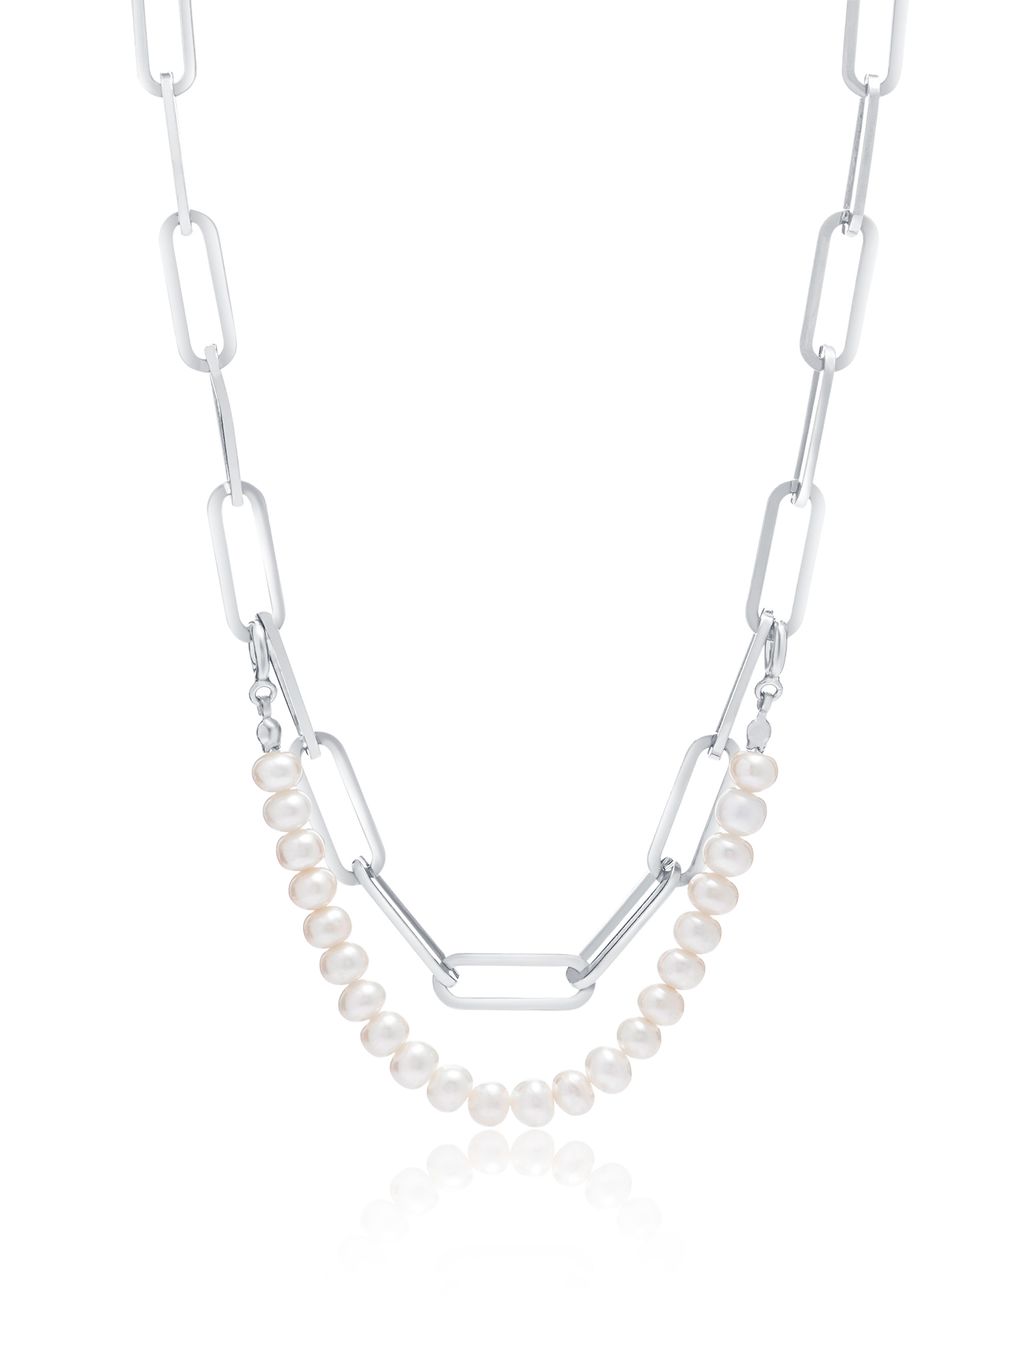 Short Pearl Silver Necklace.jpg